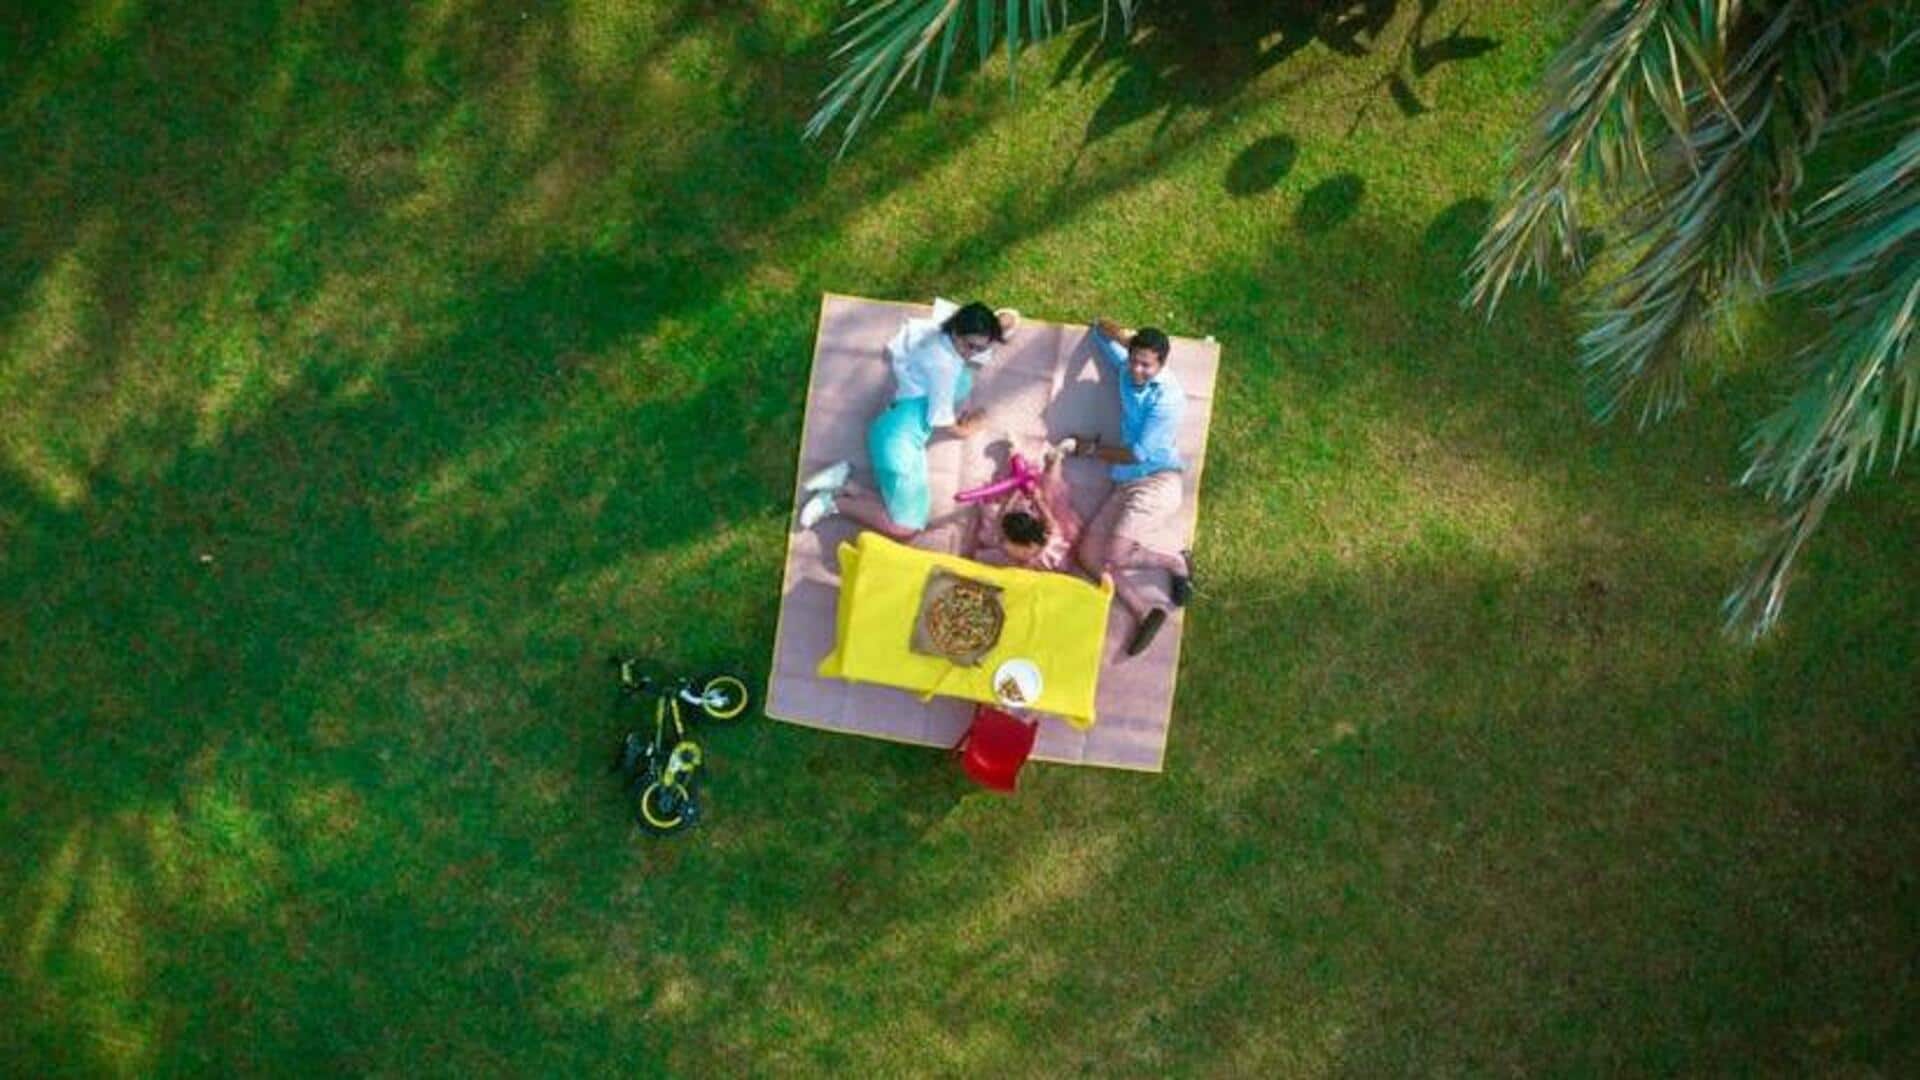 Discover Copenhagen's whimsical bicycle picnic spots